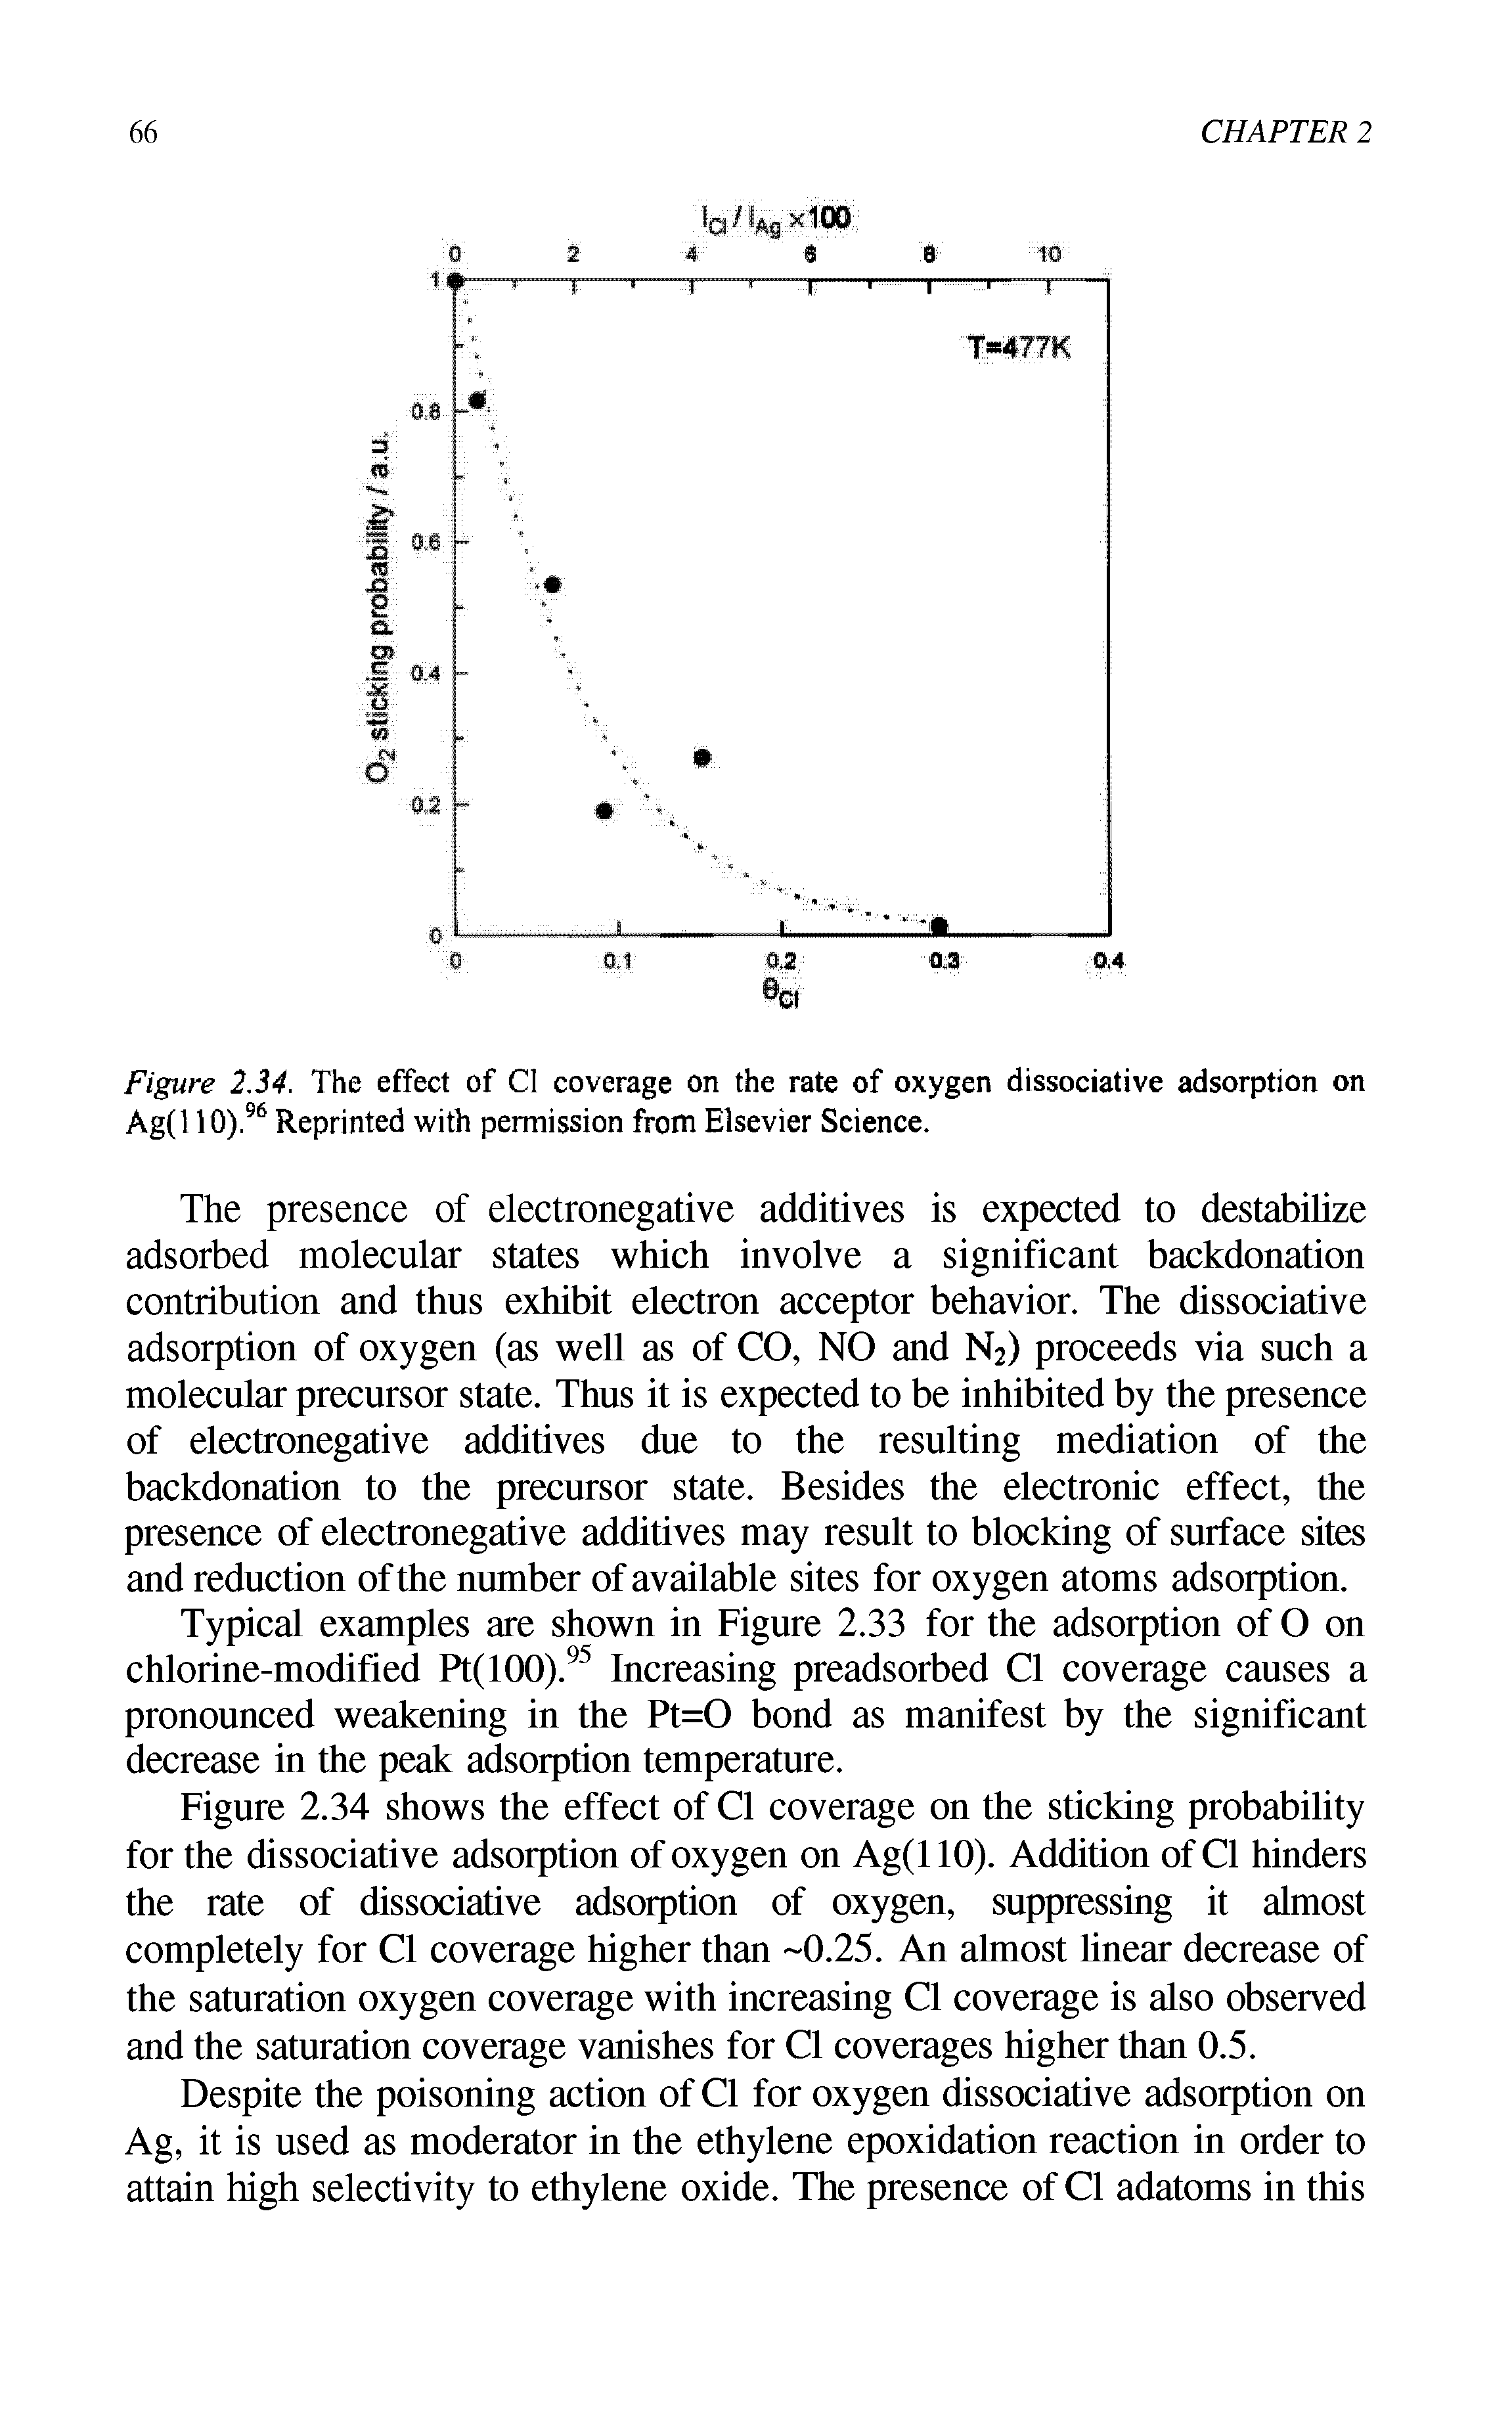 Figure 2.34. The effect of Cl coverage on the rate of oxygen dissociative adsorption on Ag(l 10).96 Reprinted with permission from Elsevier Science.